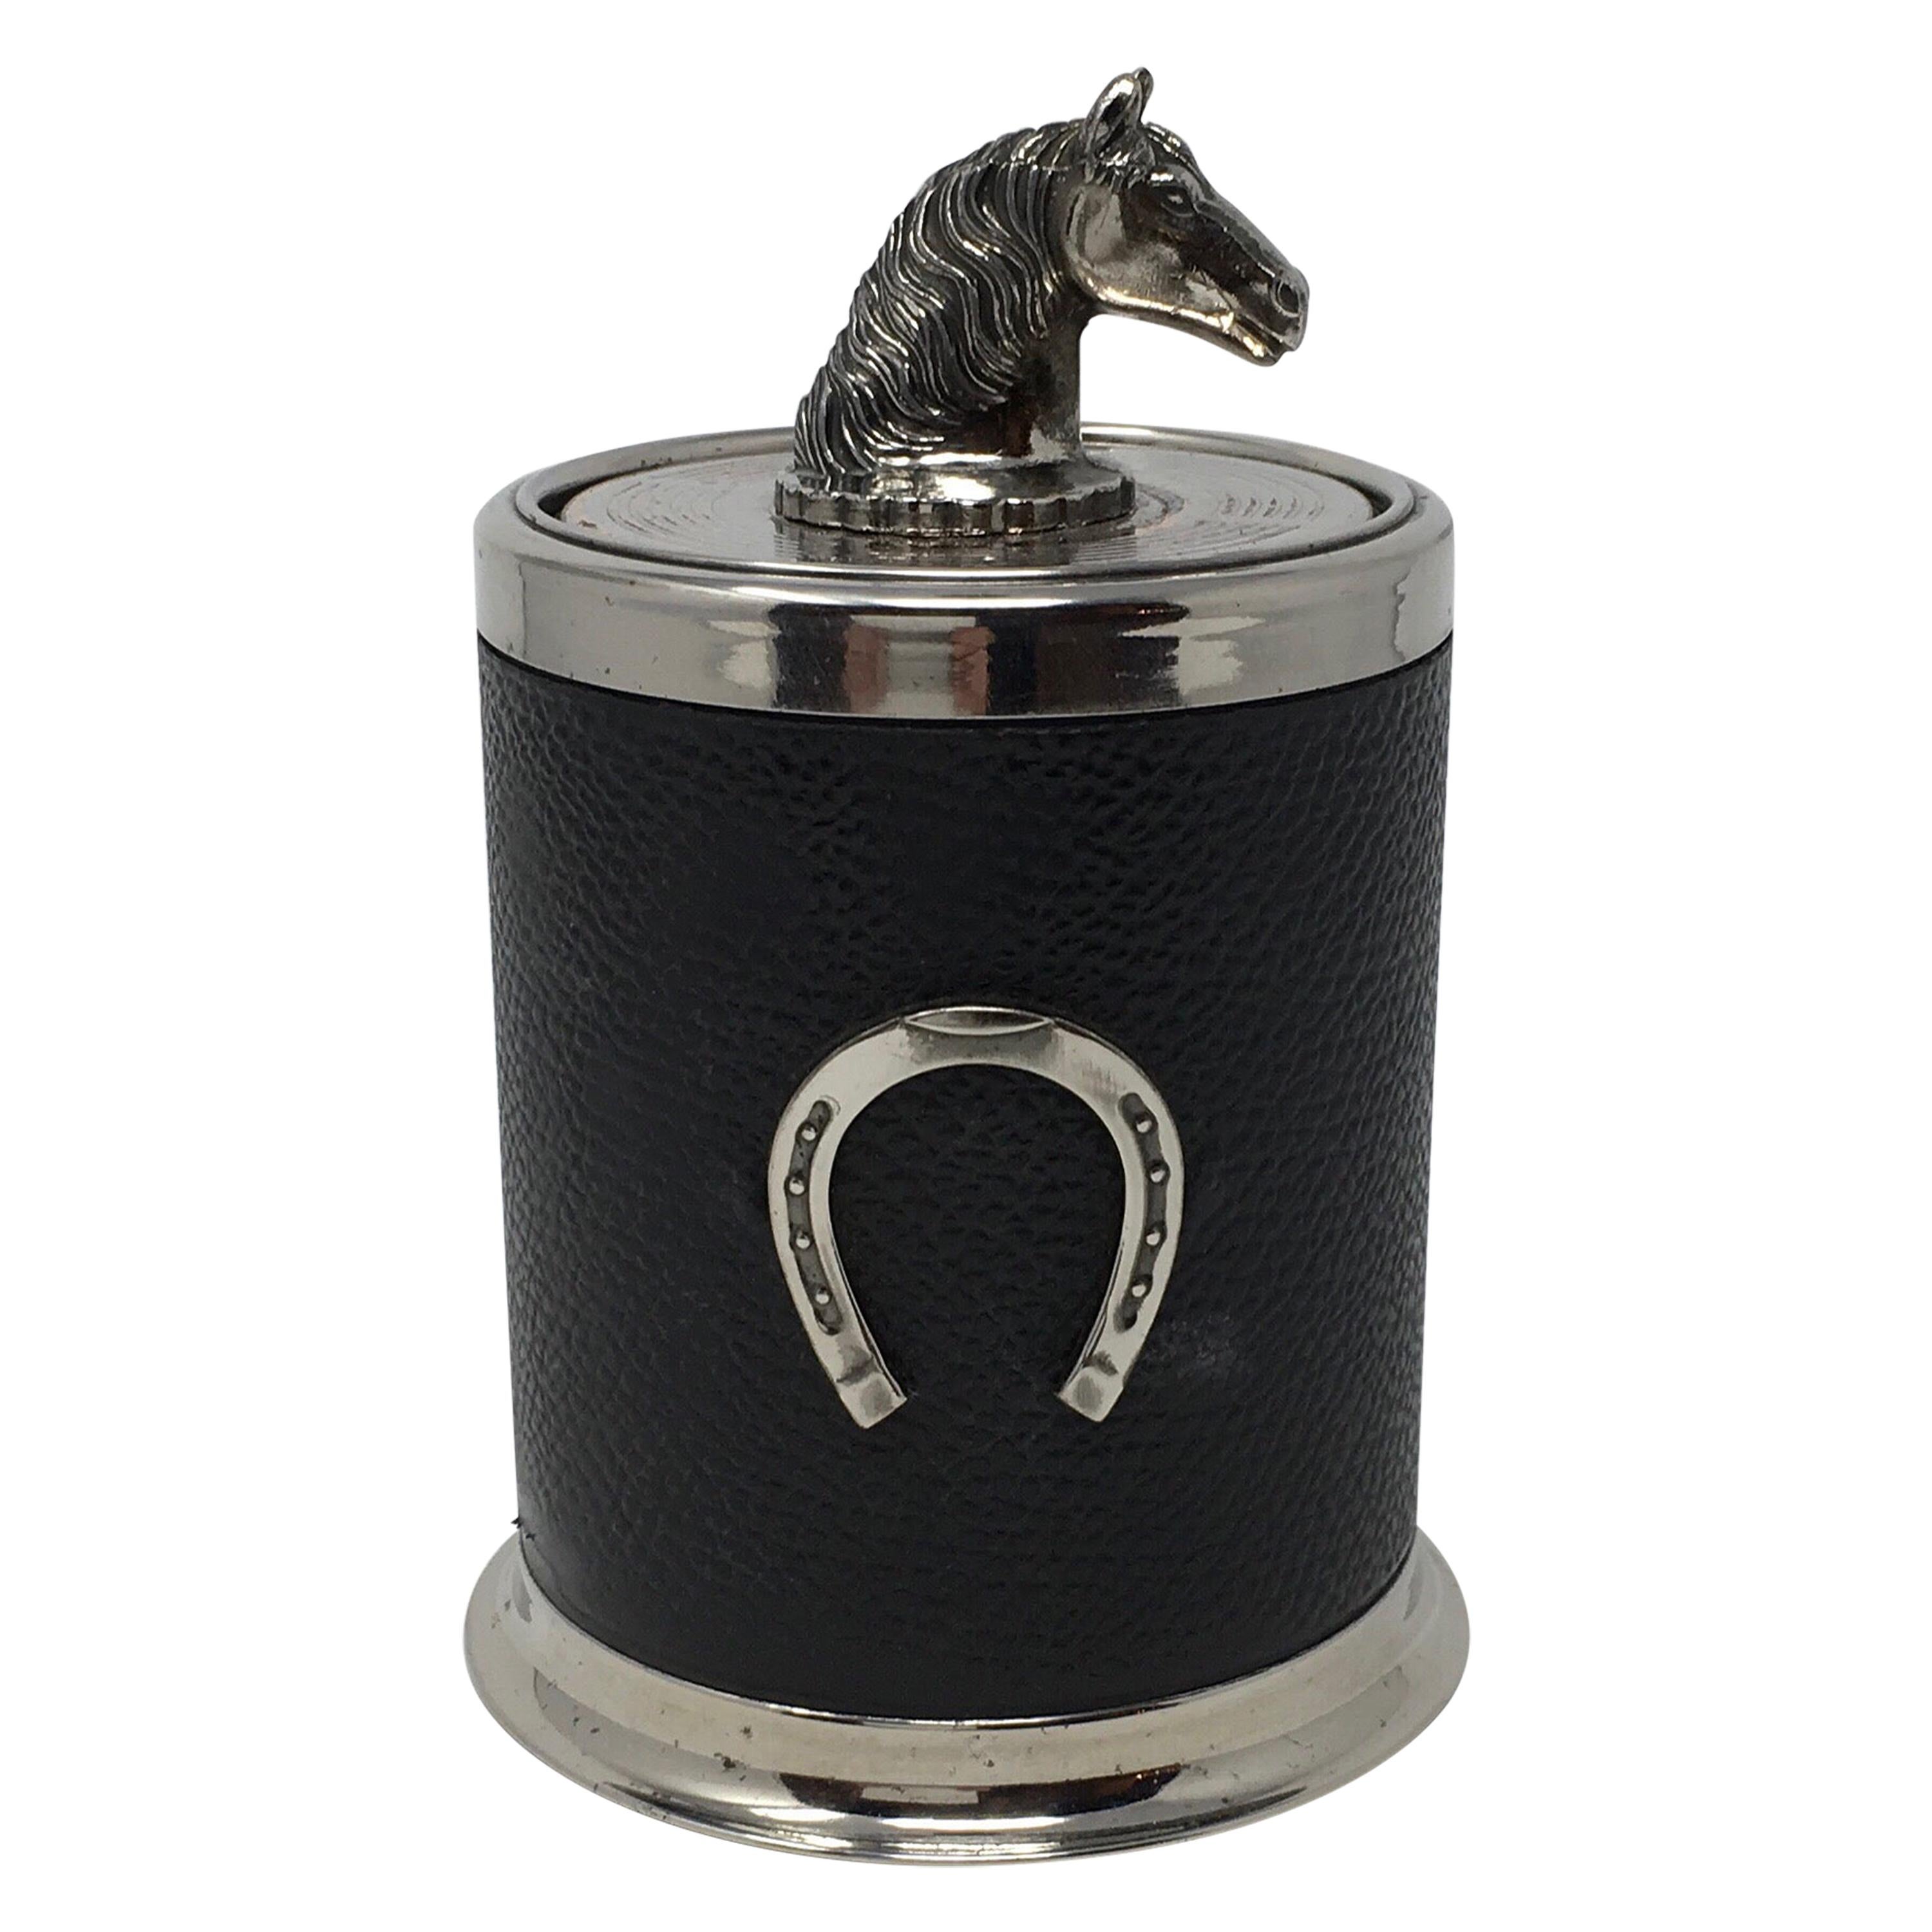 Vintage Cigarette Holder with Horse Head and Horse Shoe